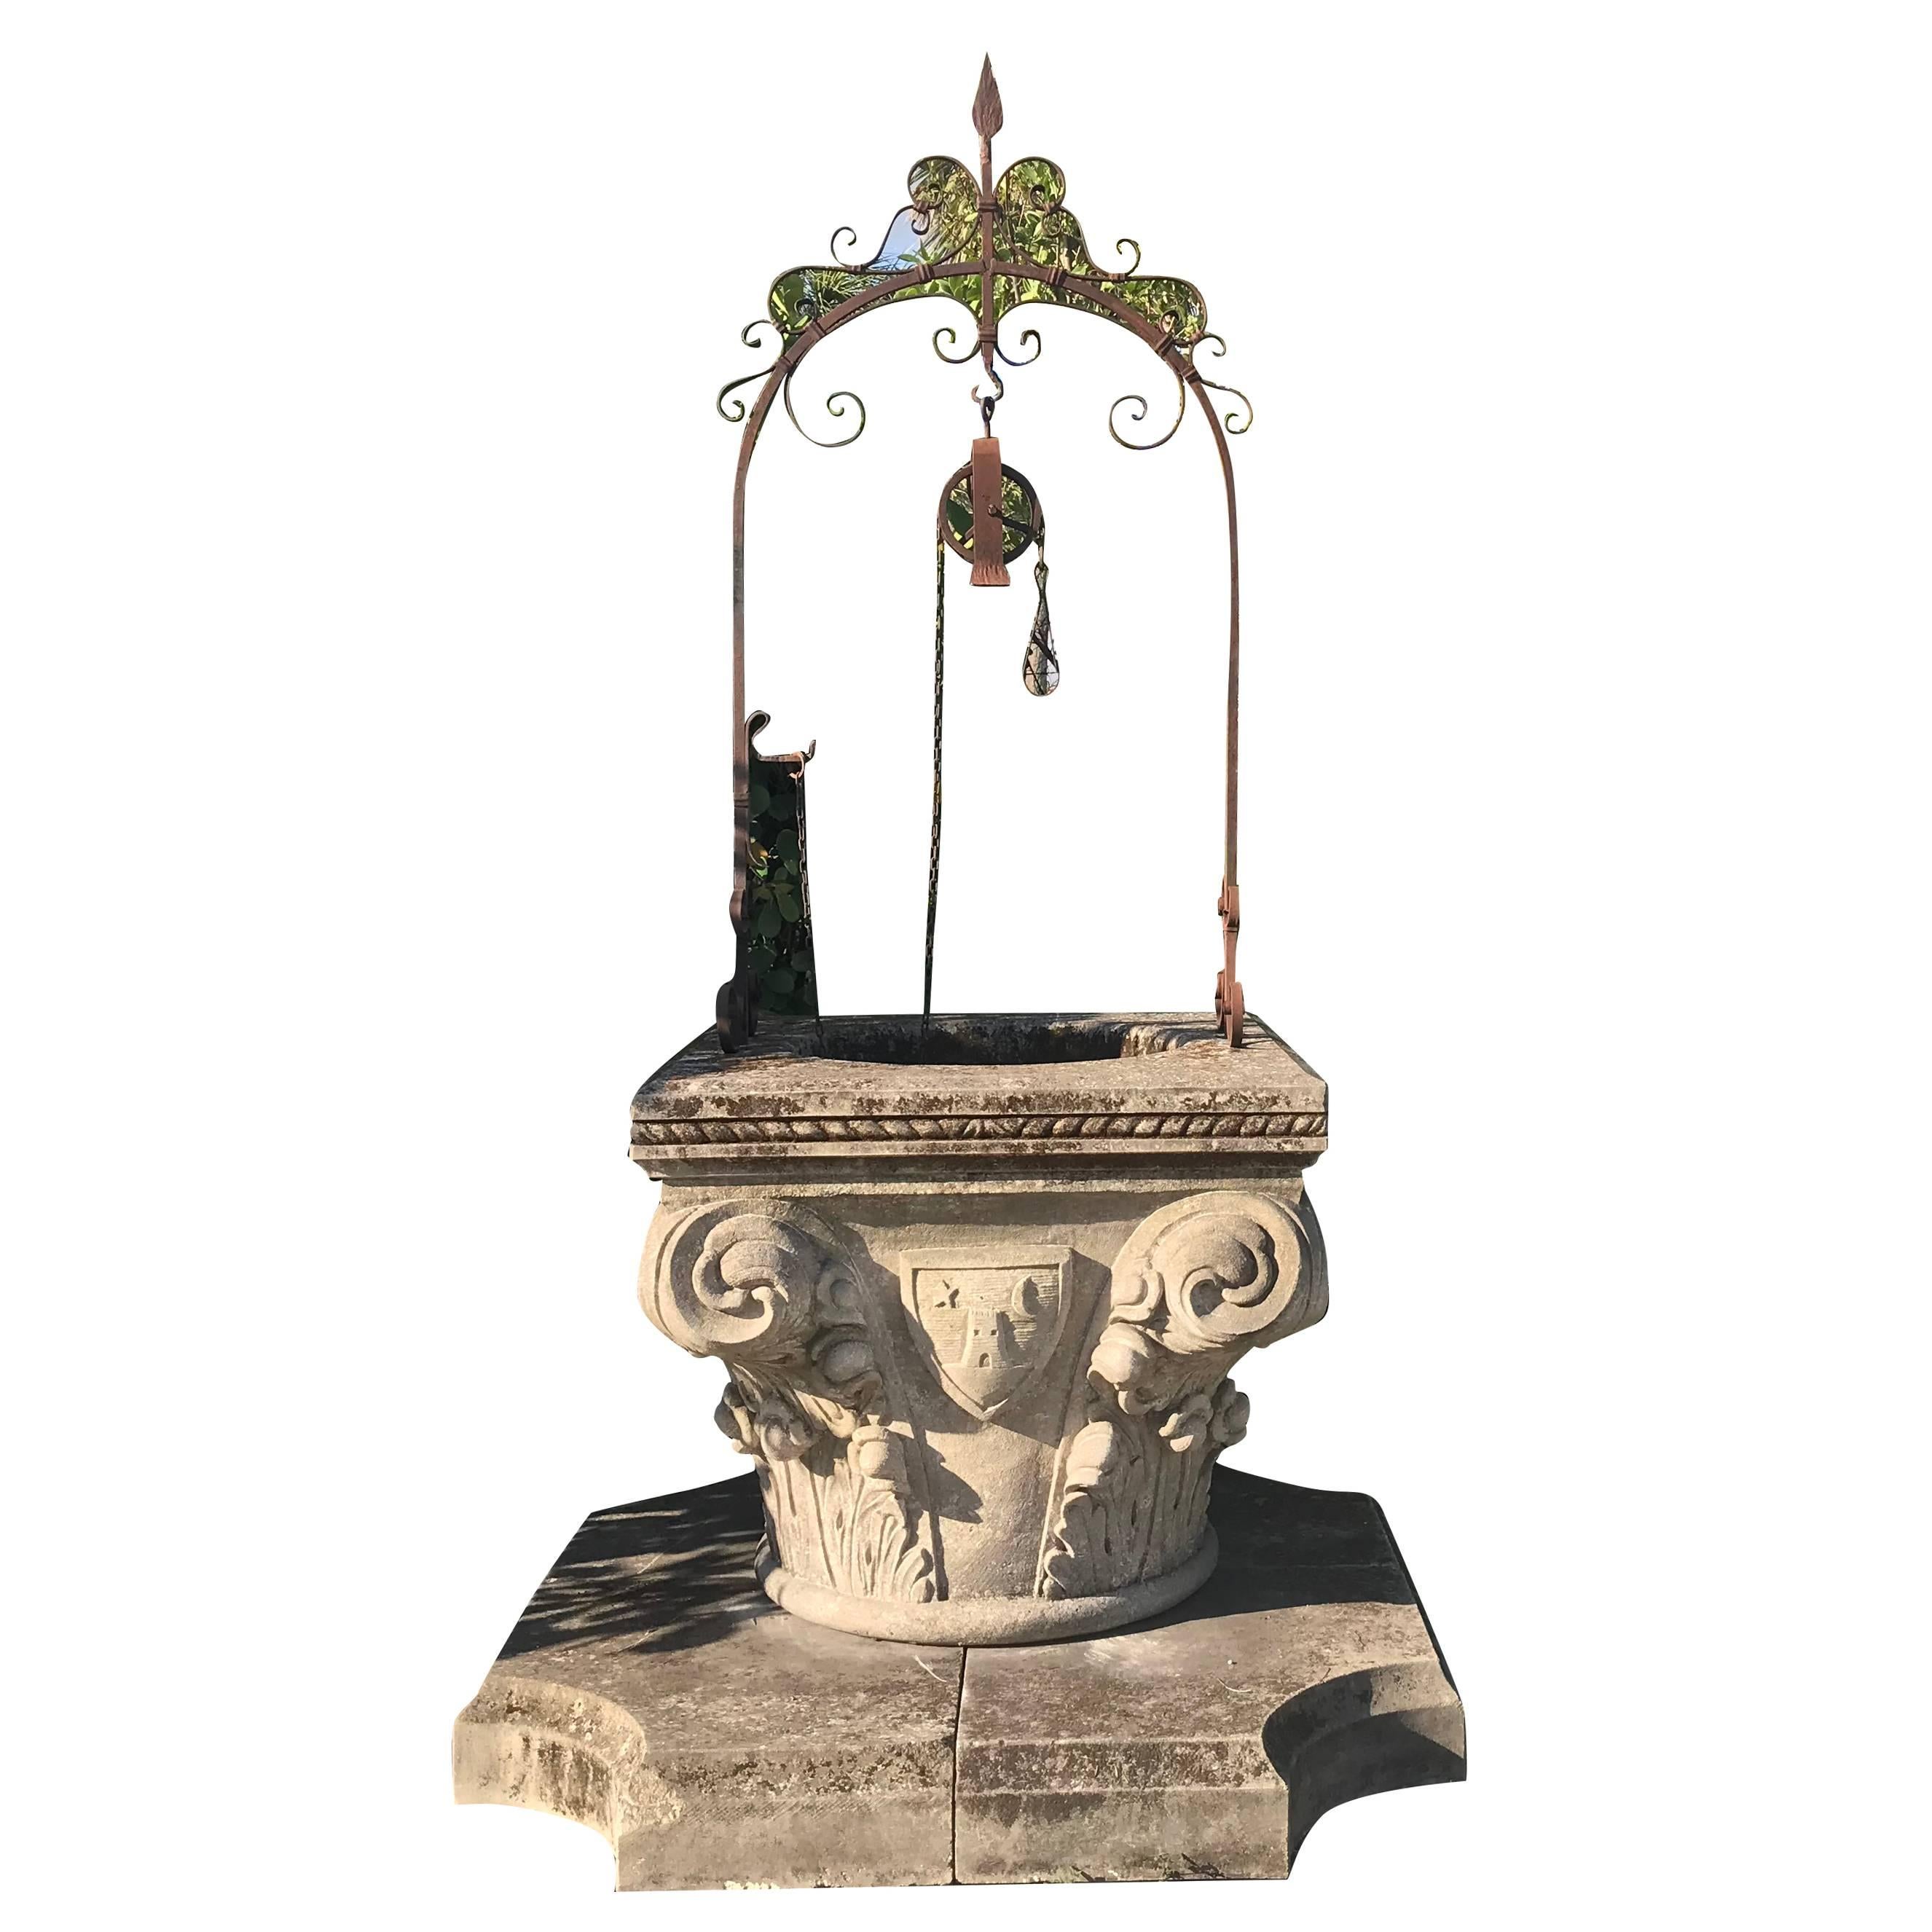 A large wellhead in the form of a Corinthian capital with heavy scrolls on each corner and positioned onto a limestone step, late Renaissance style, Italy, circa 20th century. Hand-carved details in Limestone with the original hand-forged iron